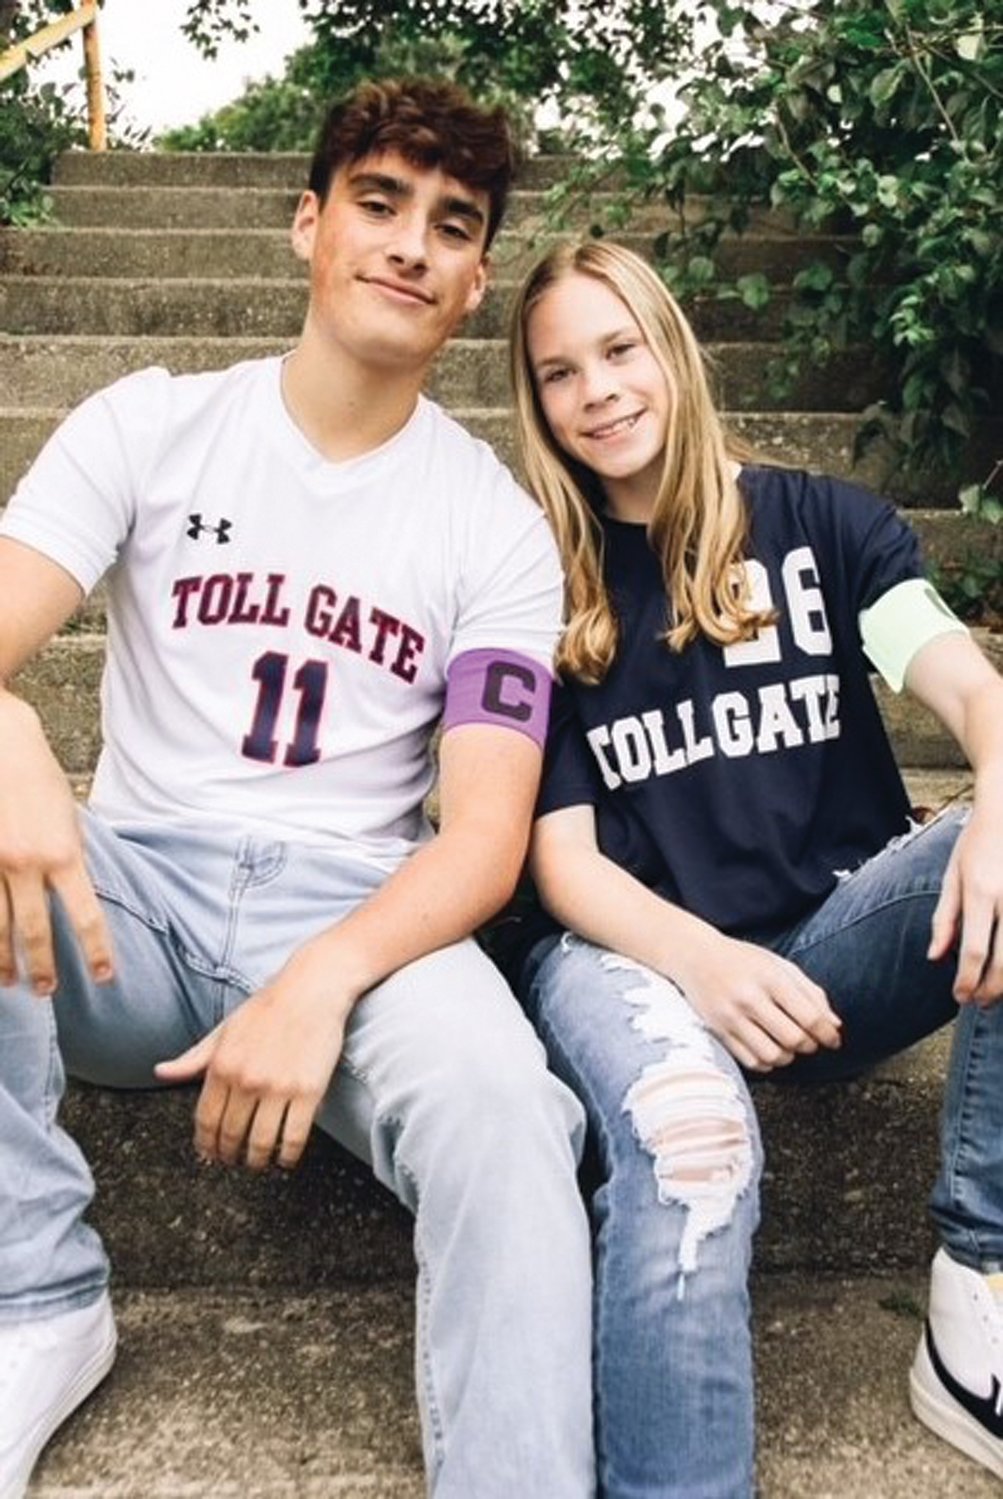 BROTHER AND SISTER: Brodie and Brooklyn Marinelli, who just wrapped up big careers for the Toll Gate soccer teams. Both were teams captains as seniors. (Submitted photos)